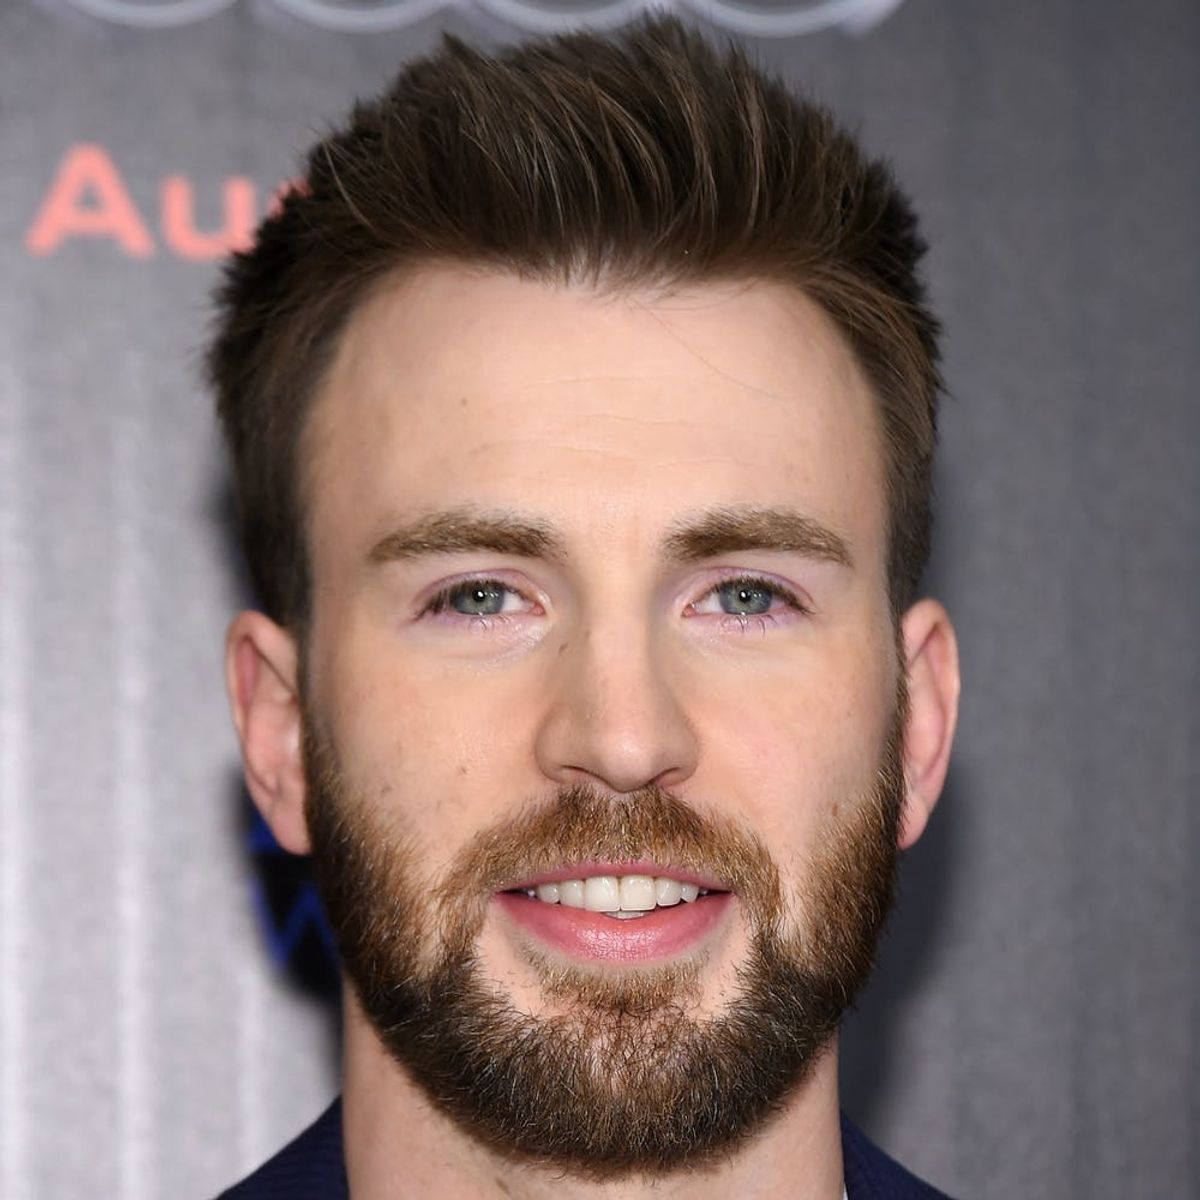 Chris Evans Made His Relationship Red Carpet Official With This Adorable Couples Debut